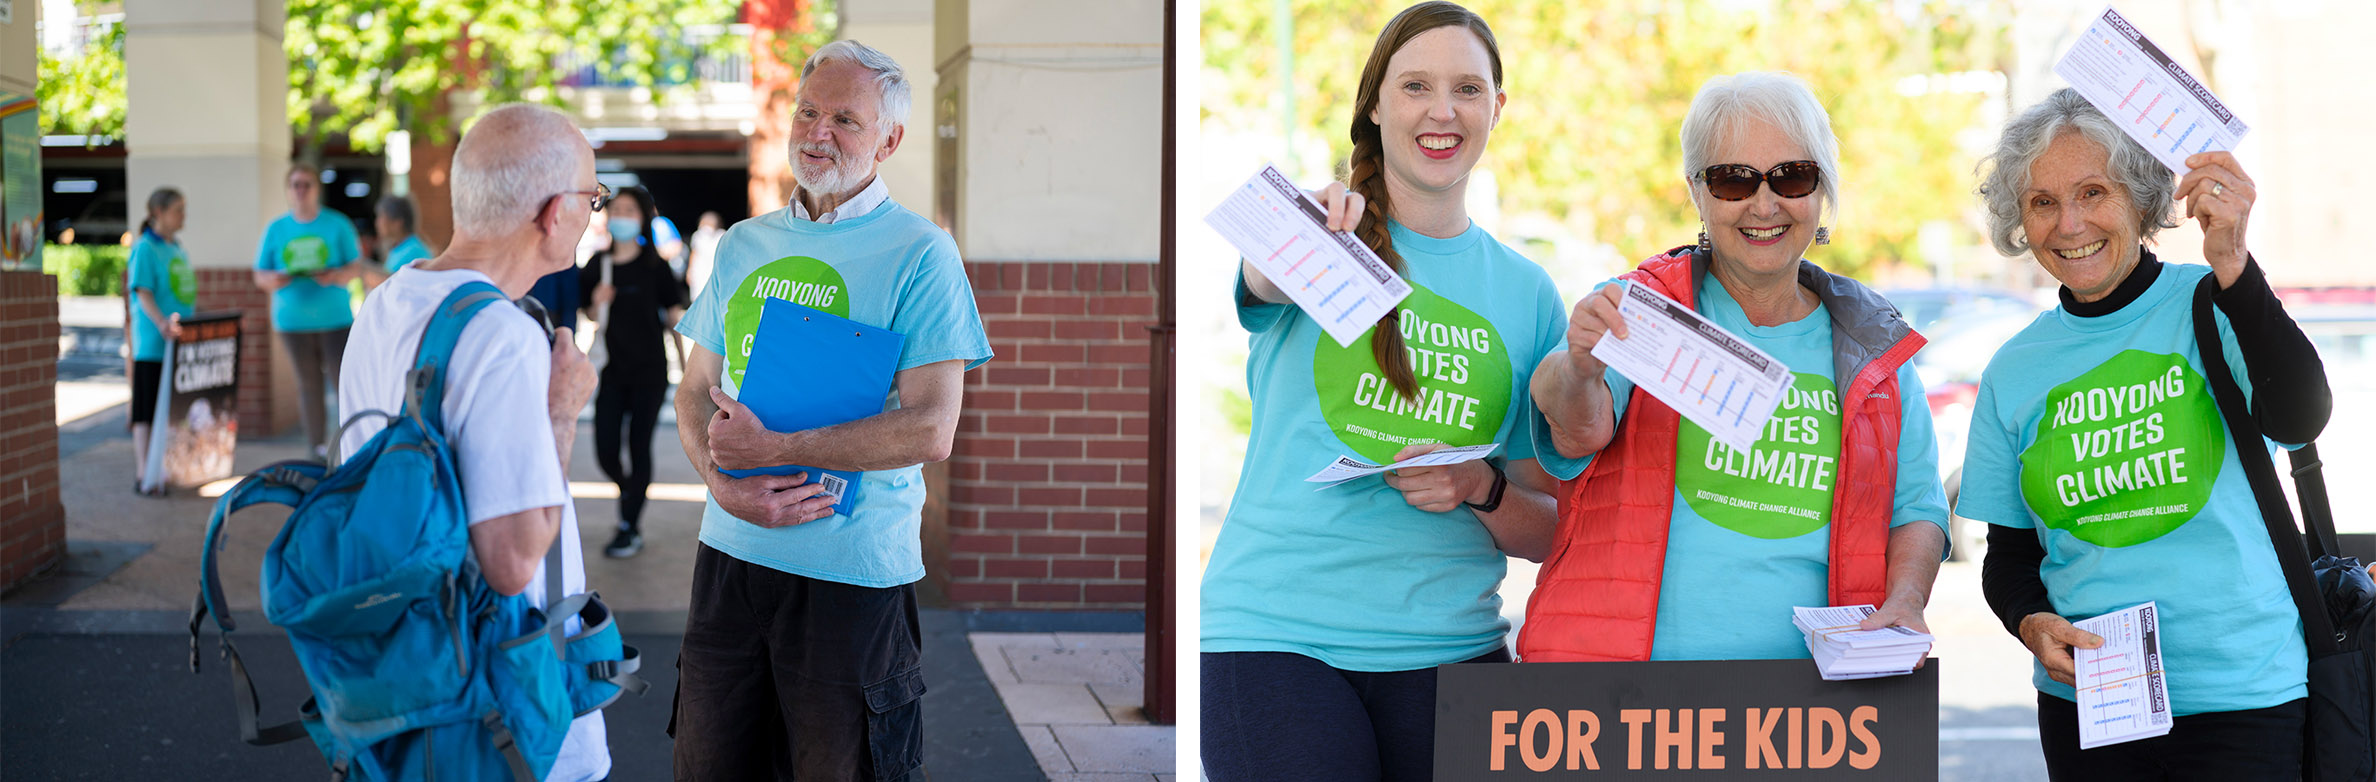 Hundreds of street conversations, Saturday conversations and train stops handing out campaign flyers and scorecards, culminating in pre-poll and polling day